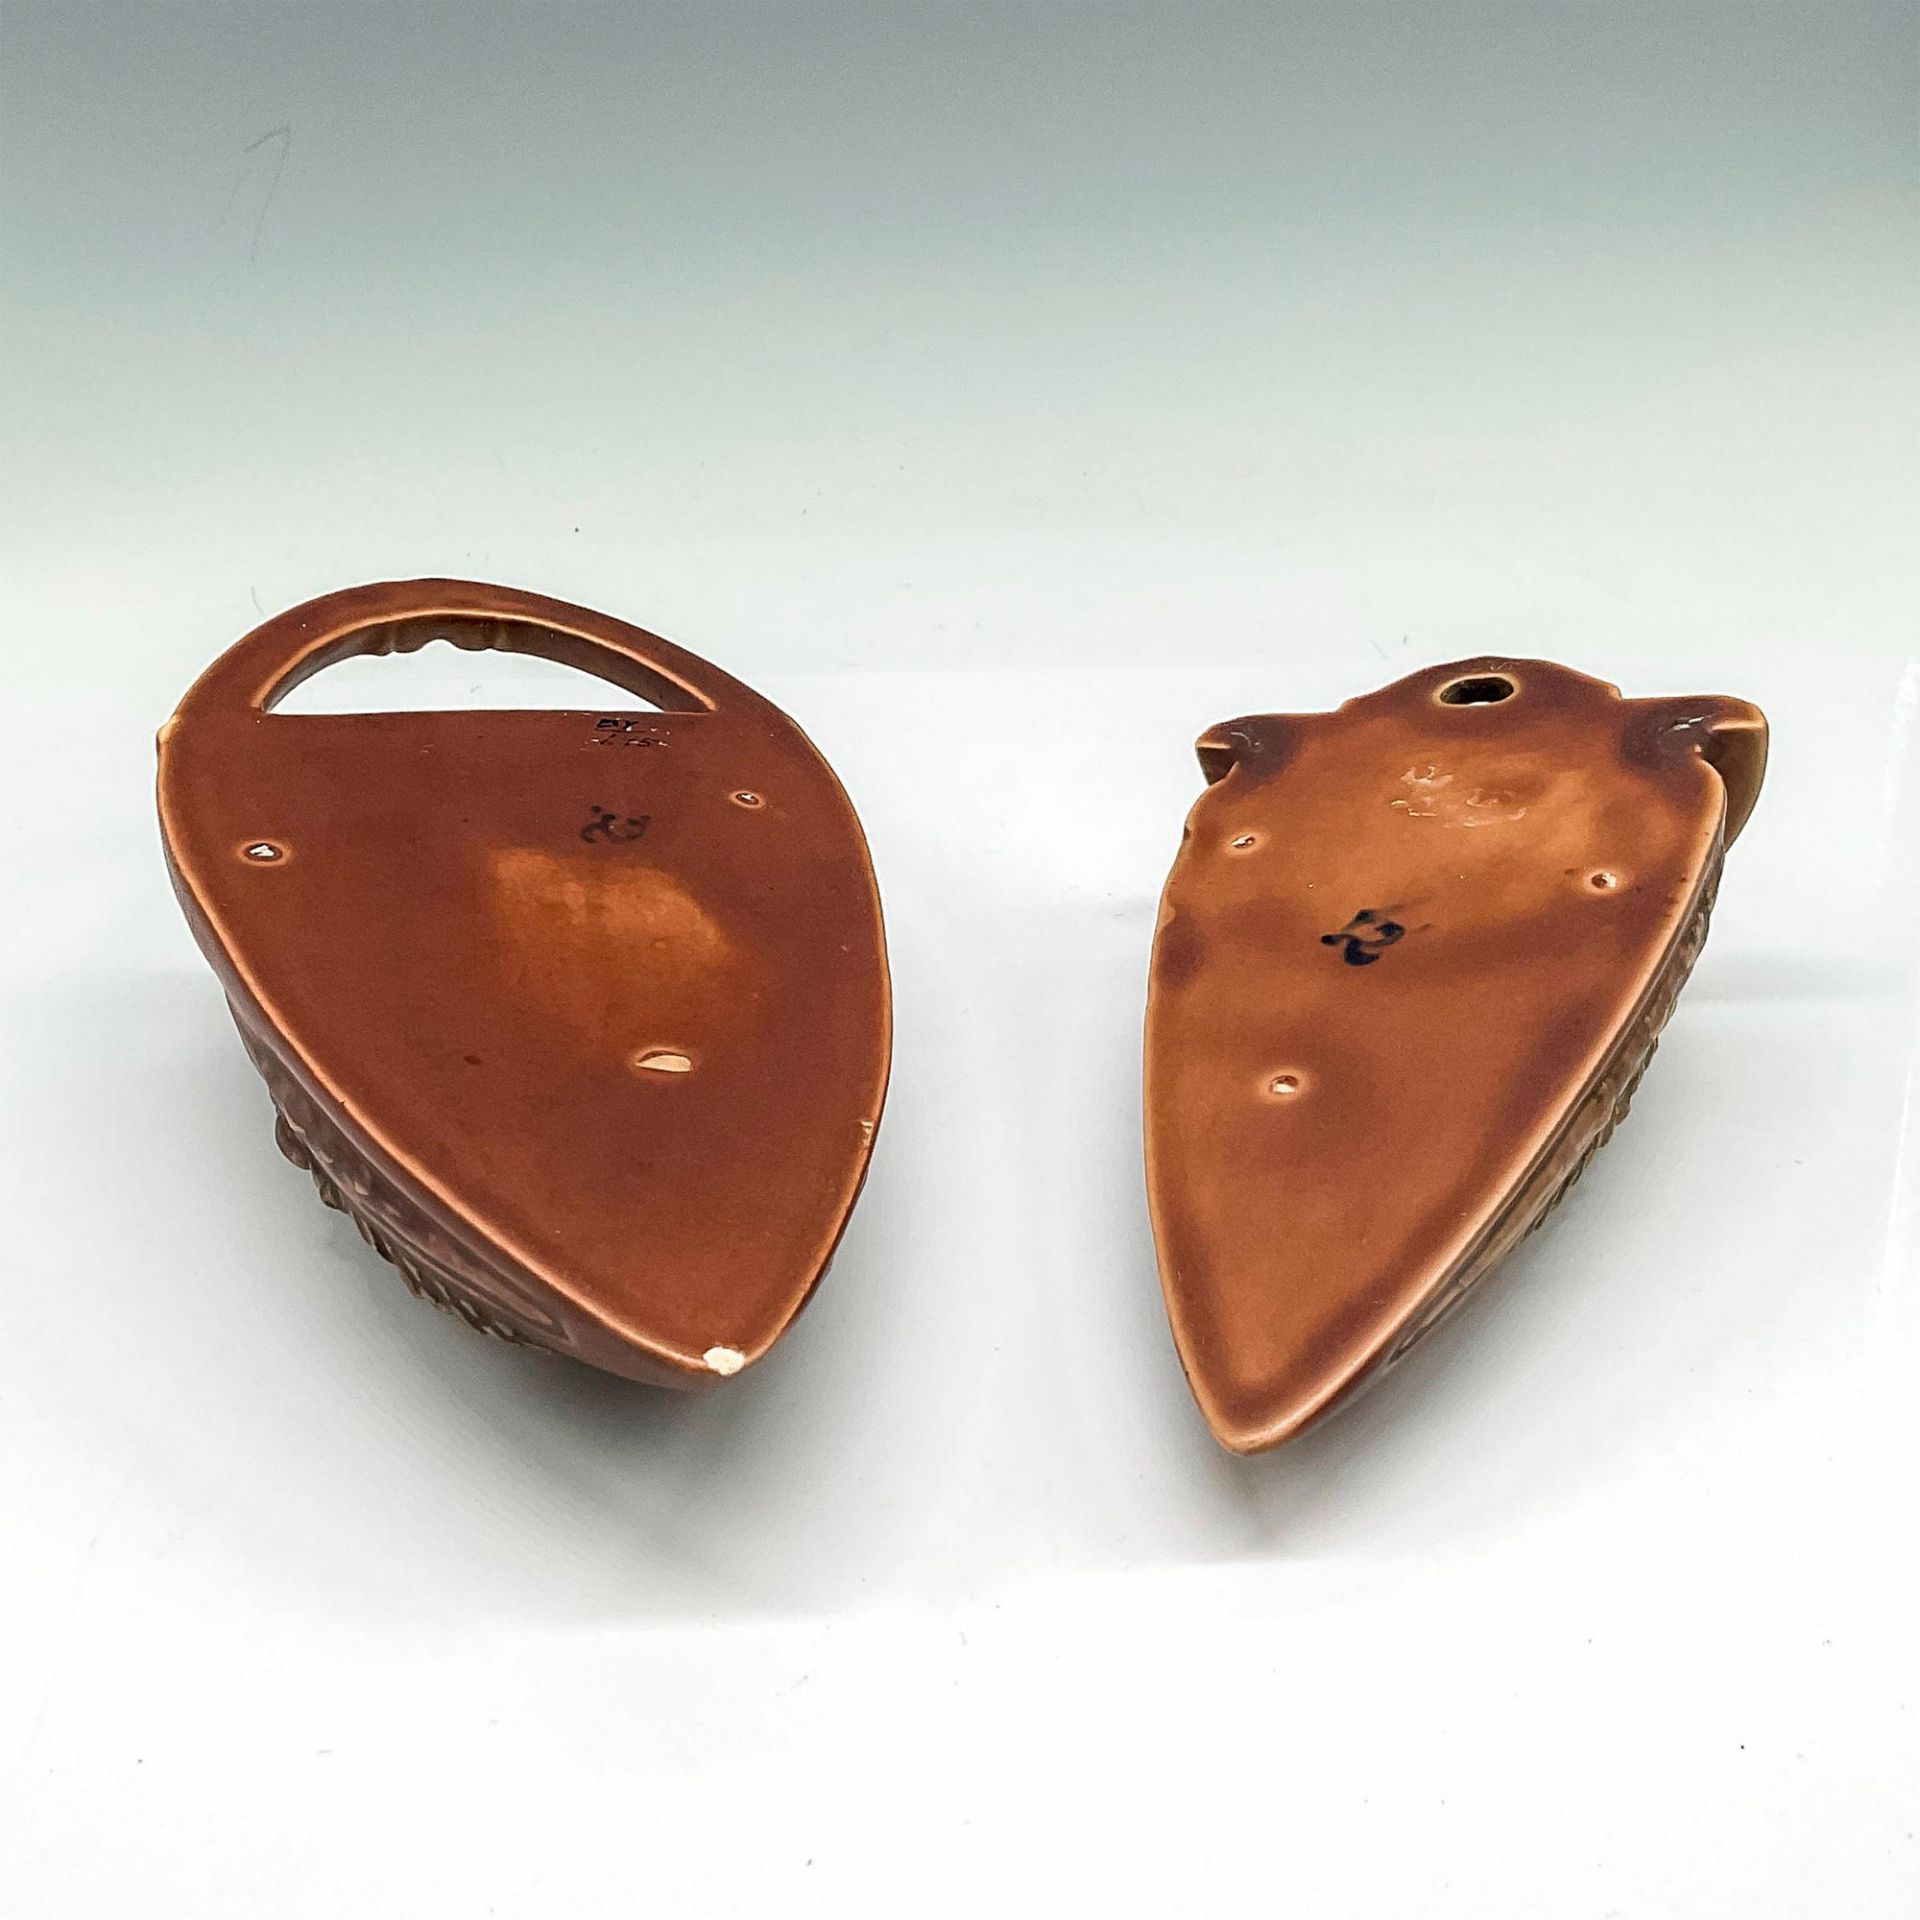 2pc Roseville Pottery Wall Pockets, Florentine Brown - Image 3 of 3